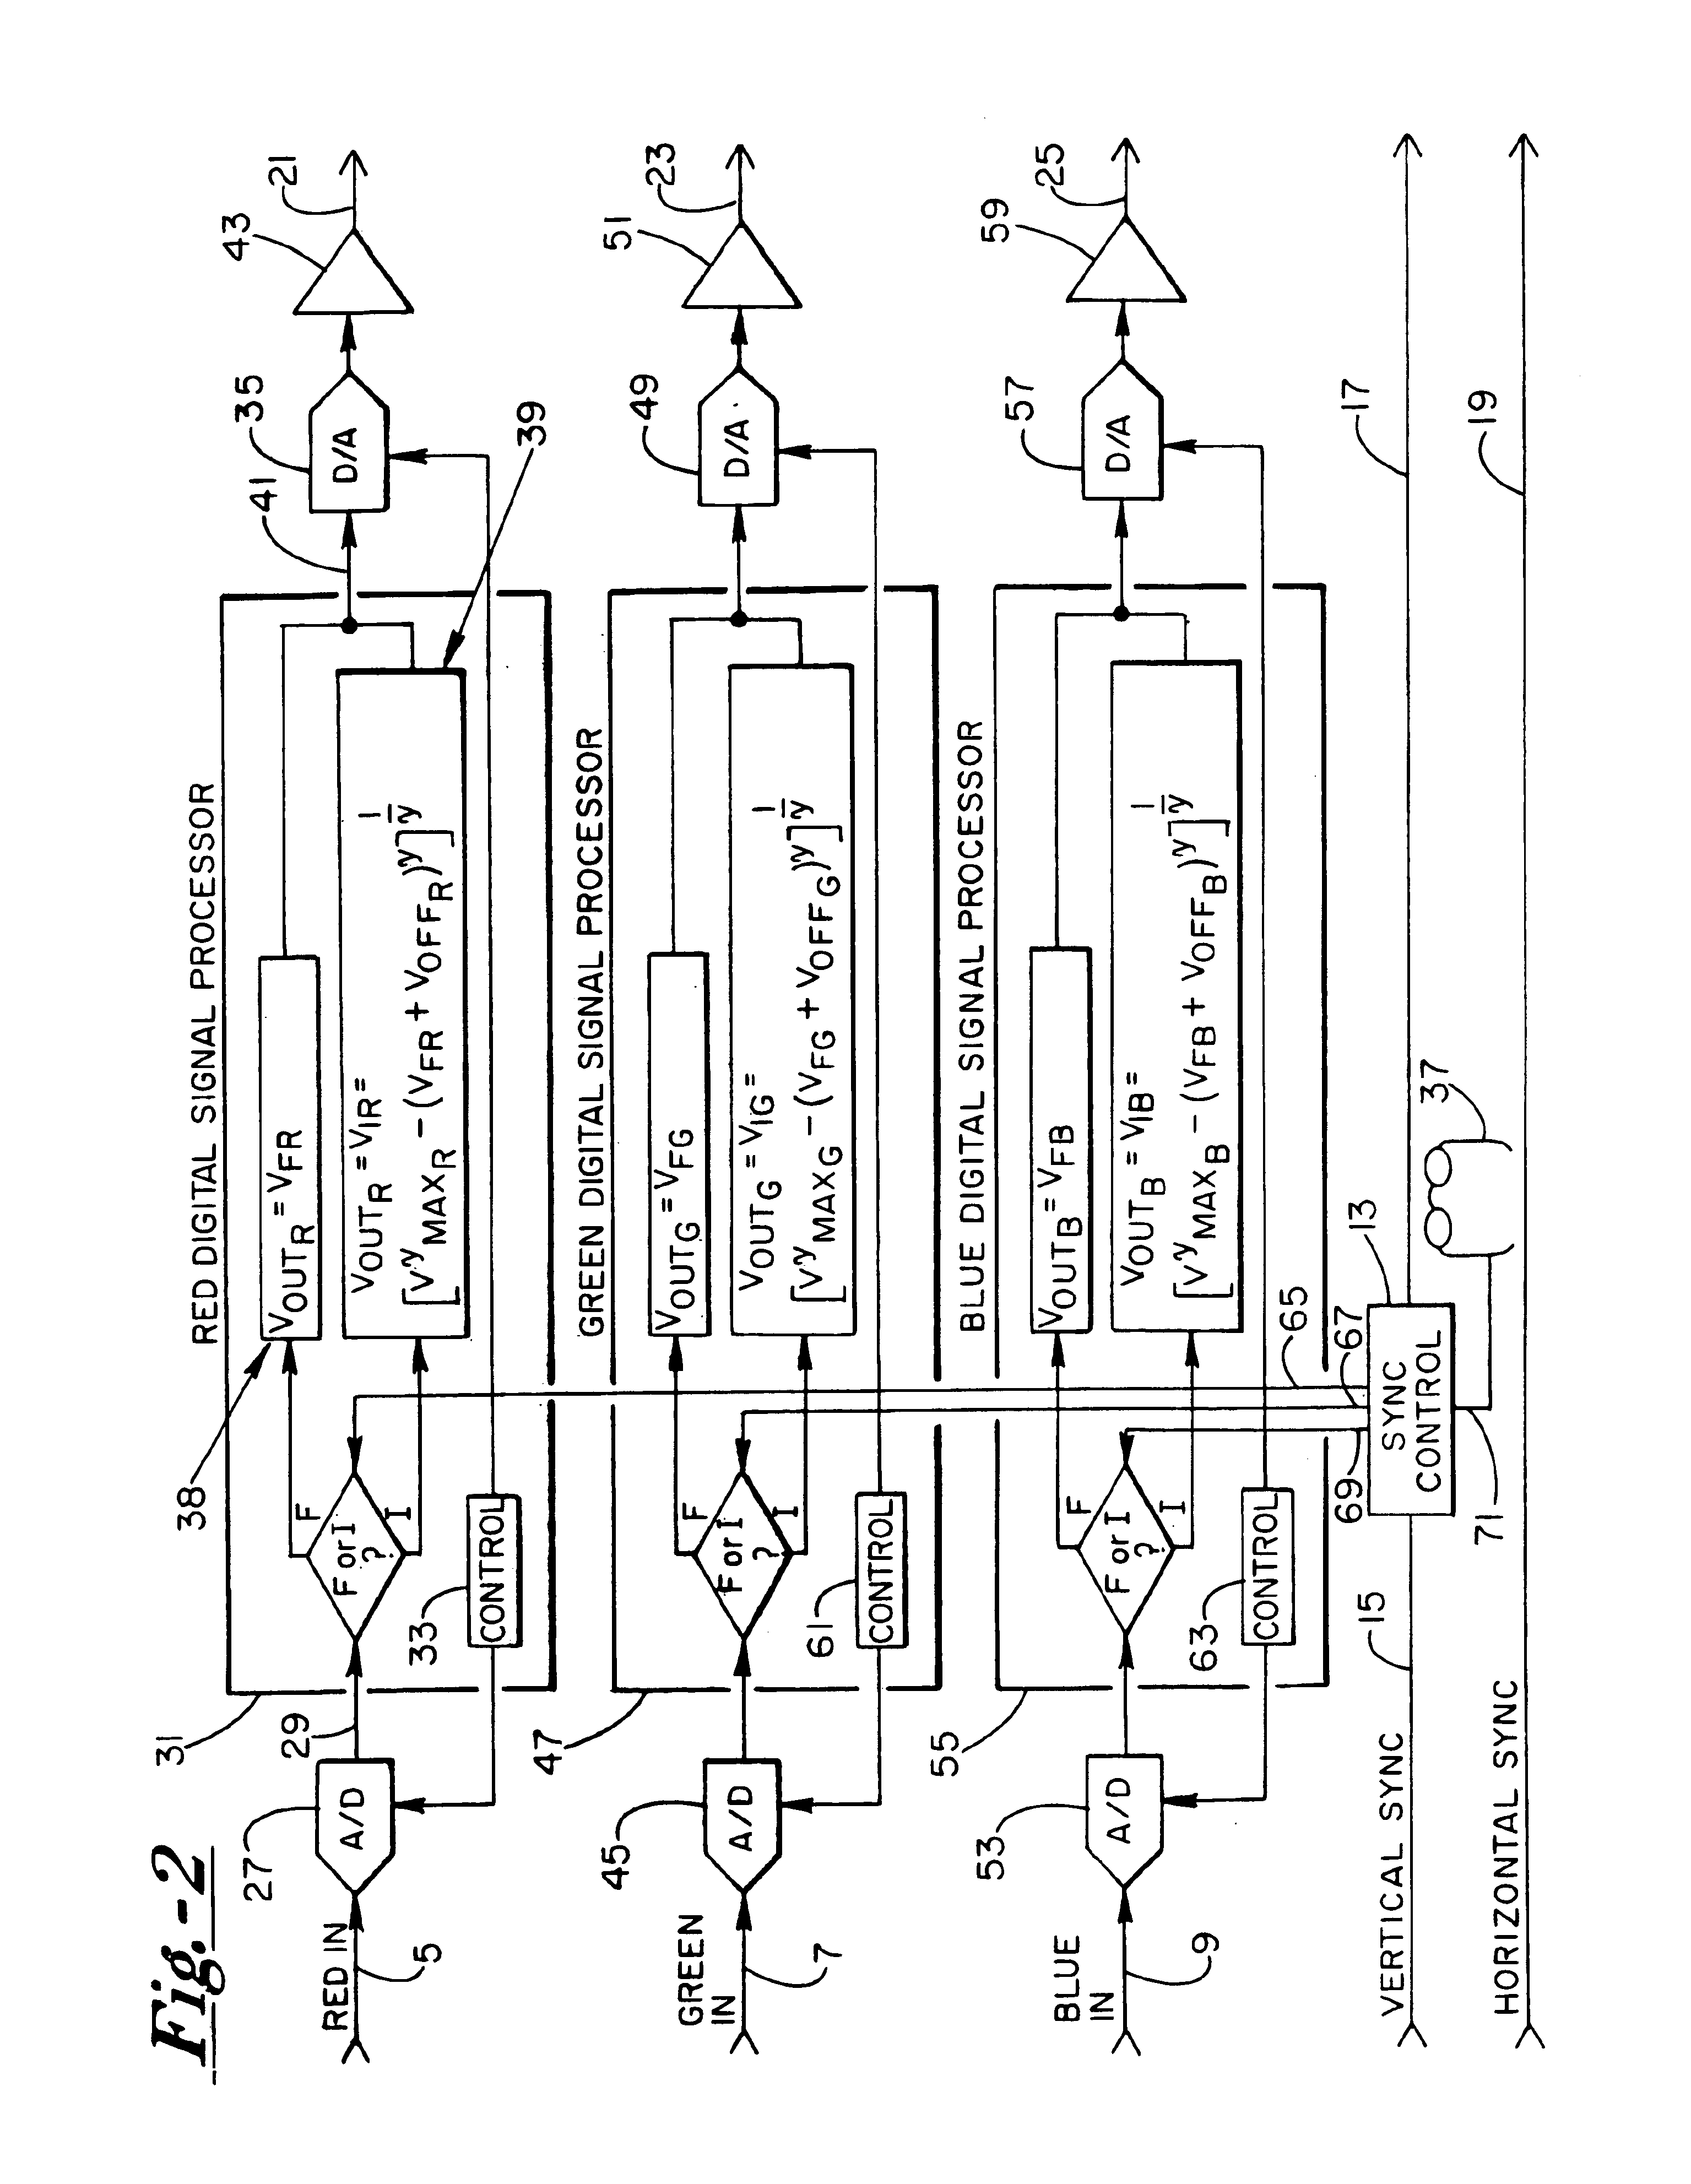 Sequential inverse encoding apparatus and method for providing confidential viewing of a fundamental display image